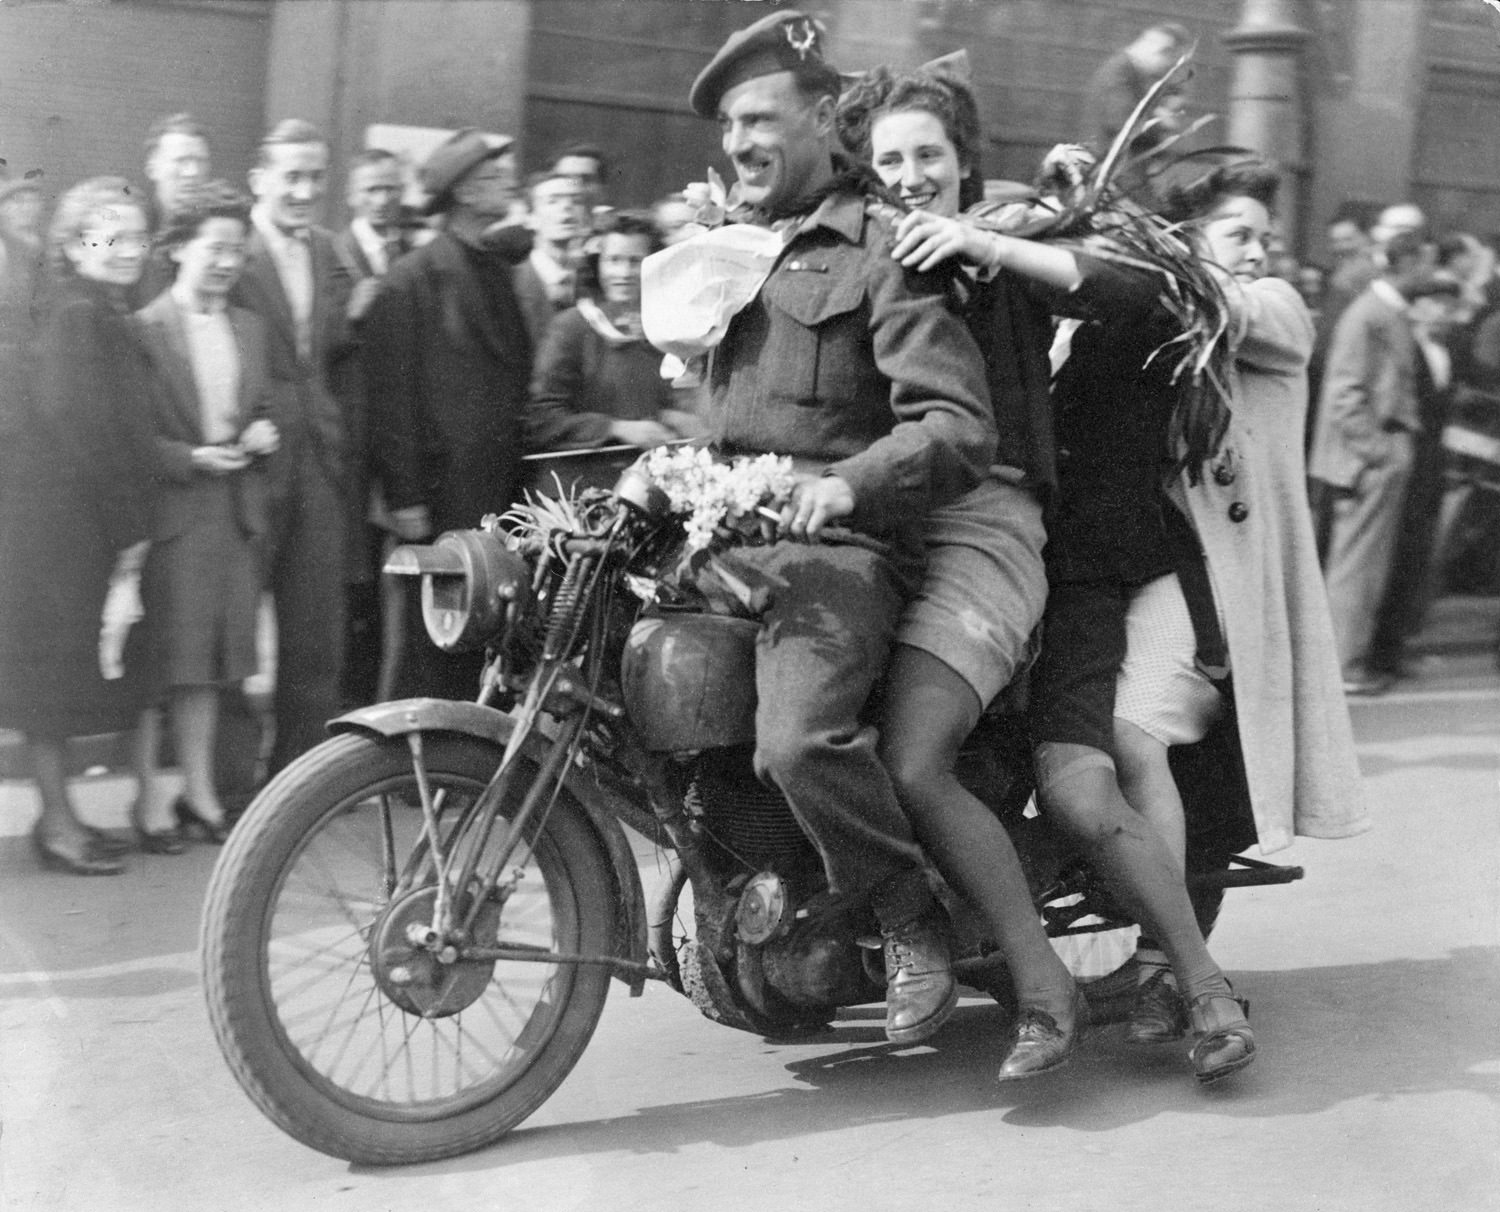 A Canadian soldier rides a motorcycle with 3 happy ladies in Amsterdam, The Netherlands in 1945.